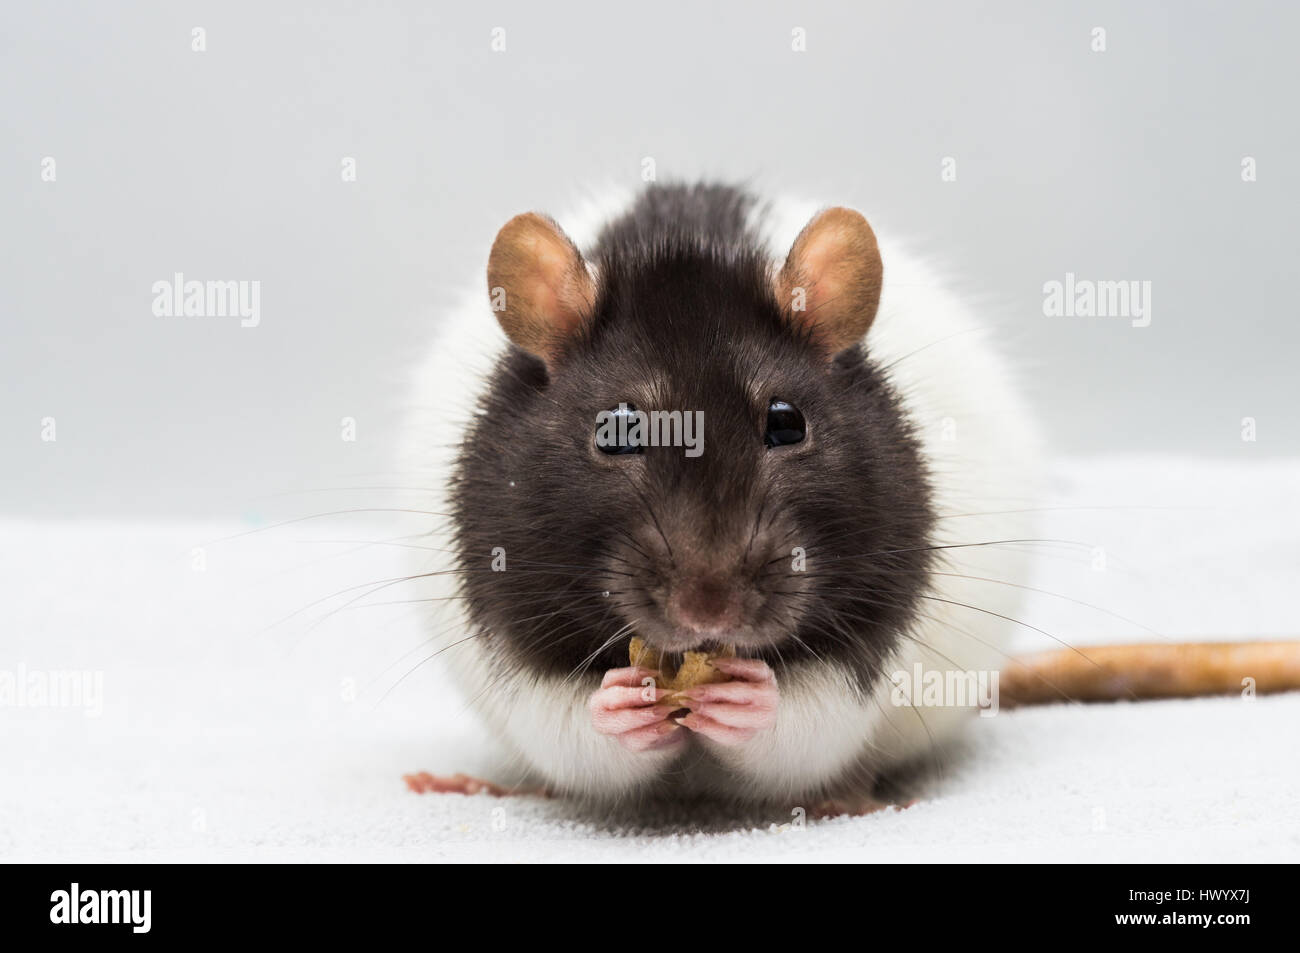 Rat eating a cereal Stock Photo